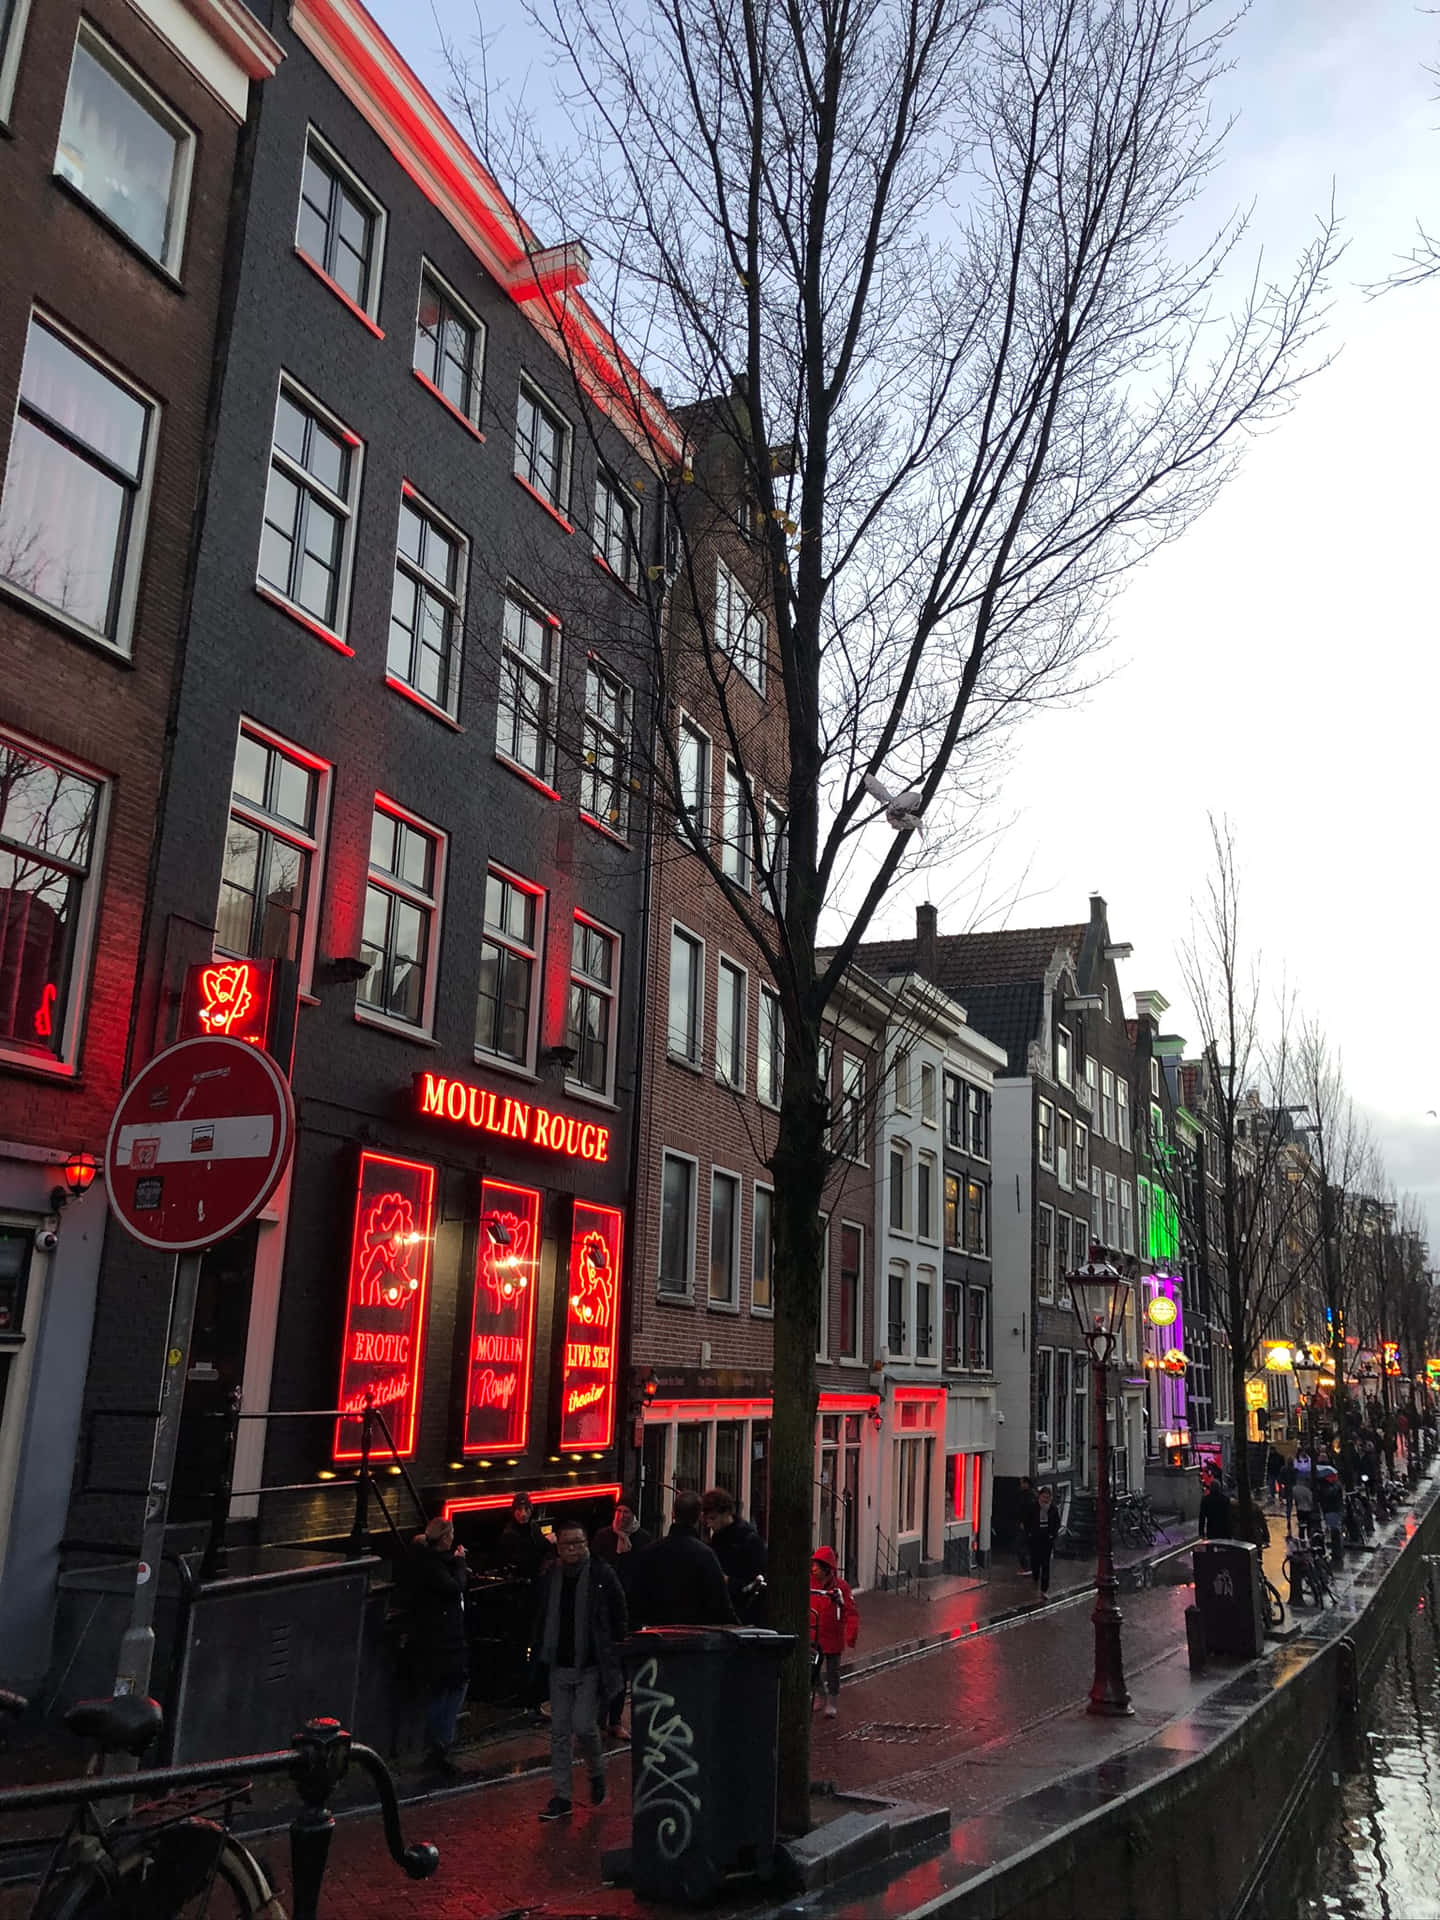 Vibrant colors illuminating the iconic Red Light District at night. Wallpaper